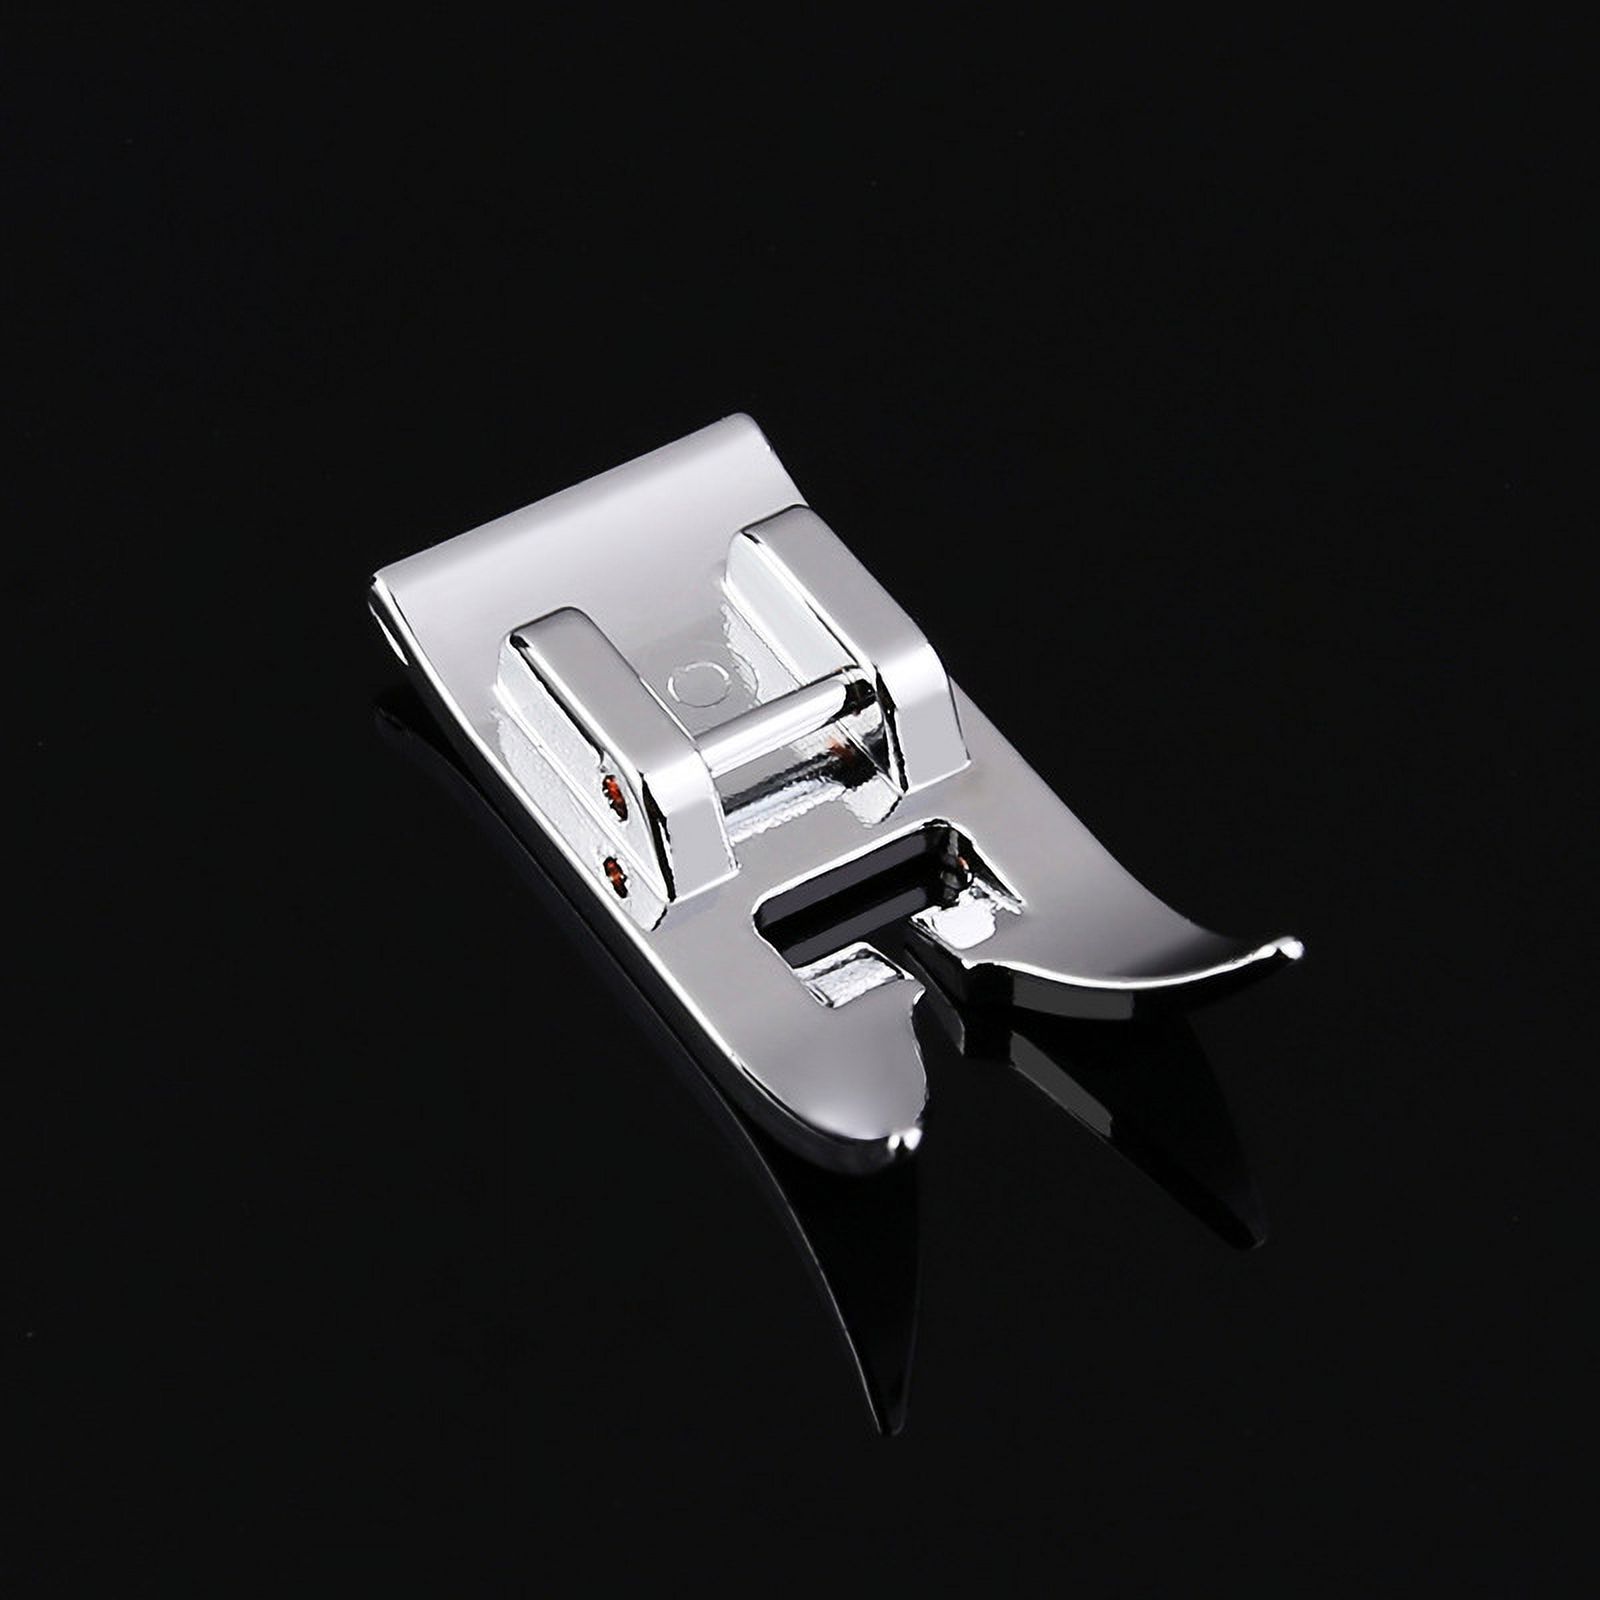 Domestic Sewing Machine Accessories Presser Foot Feet for Brother Singer Janome;Domestic Sewing Machine Accessories Presser Foot Feet for Brother Singer - image 4 of 8